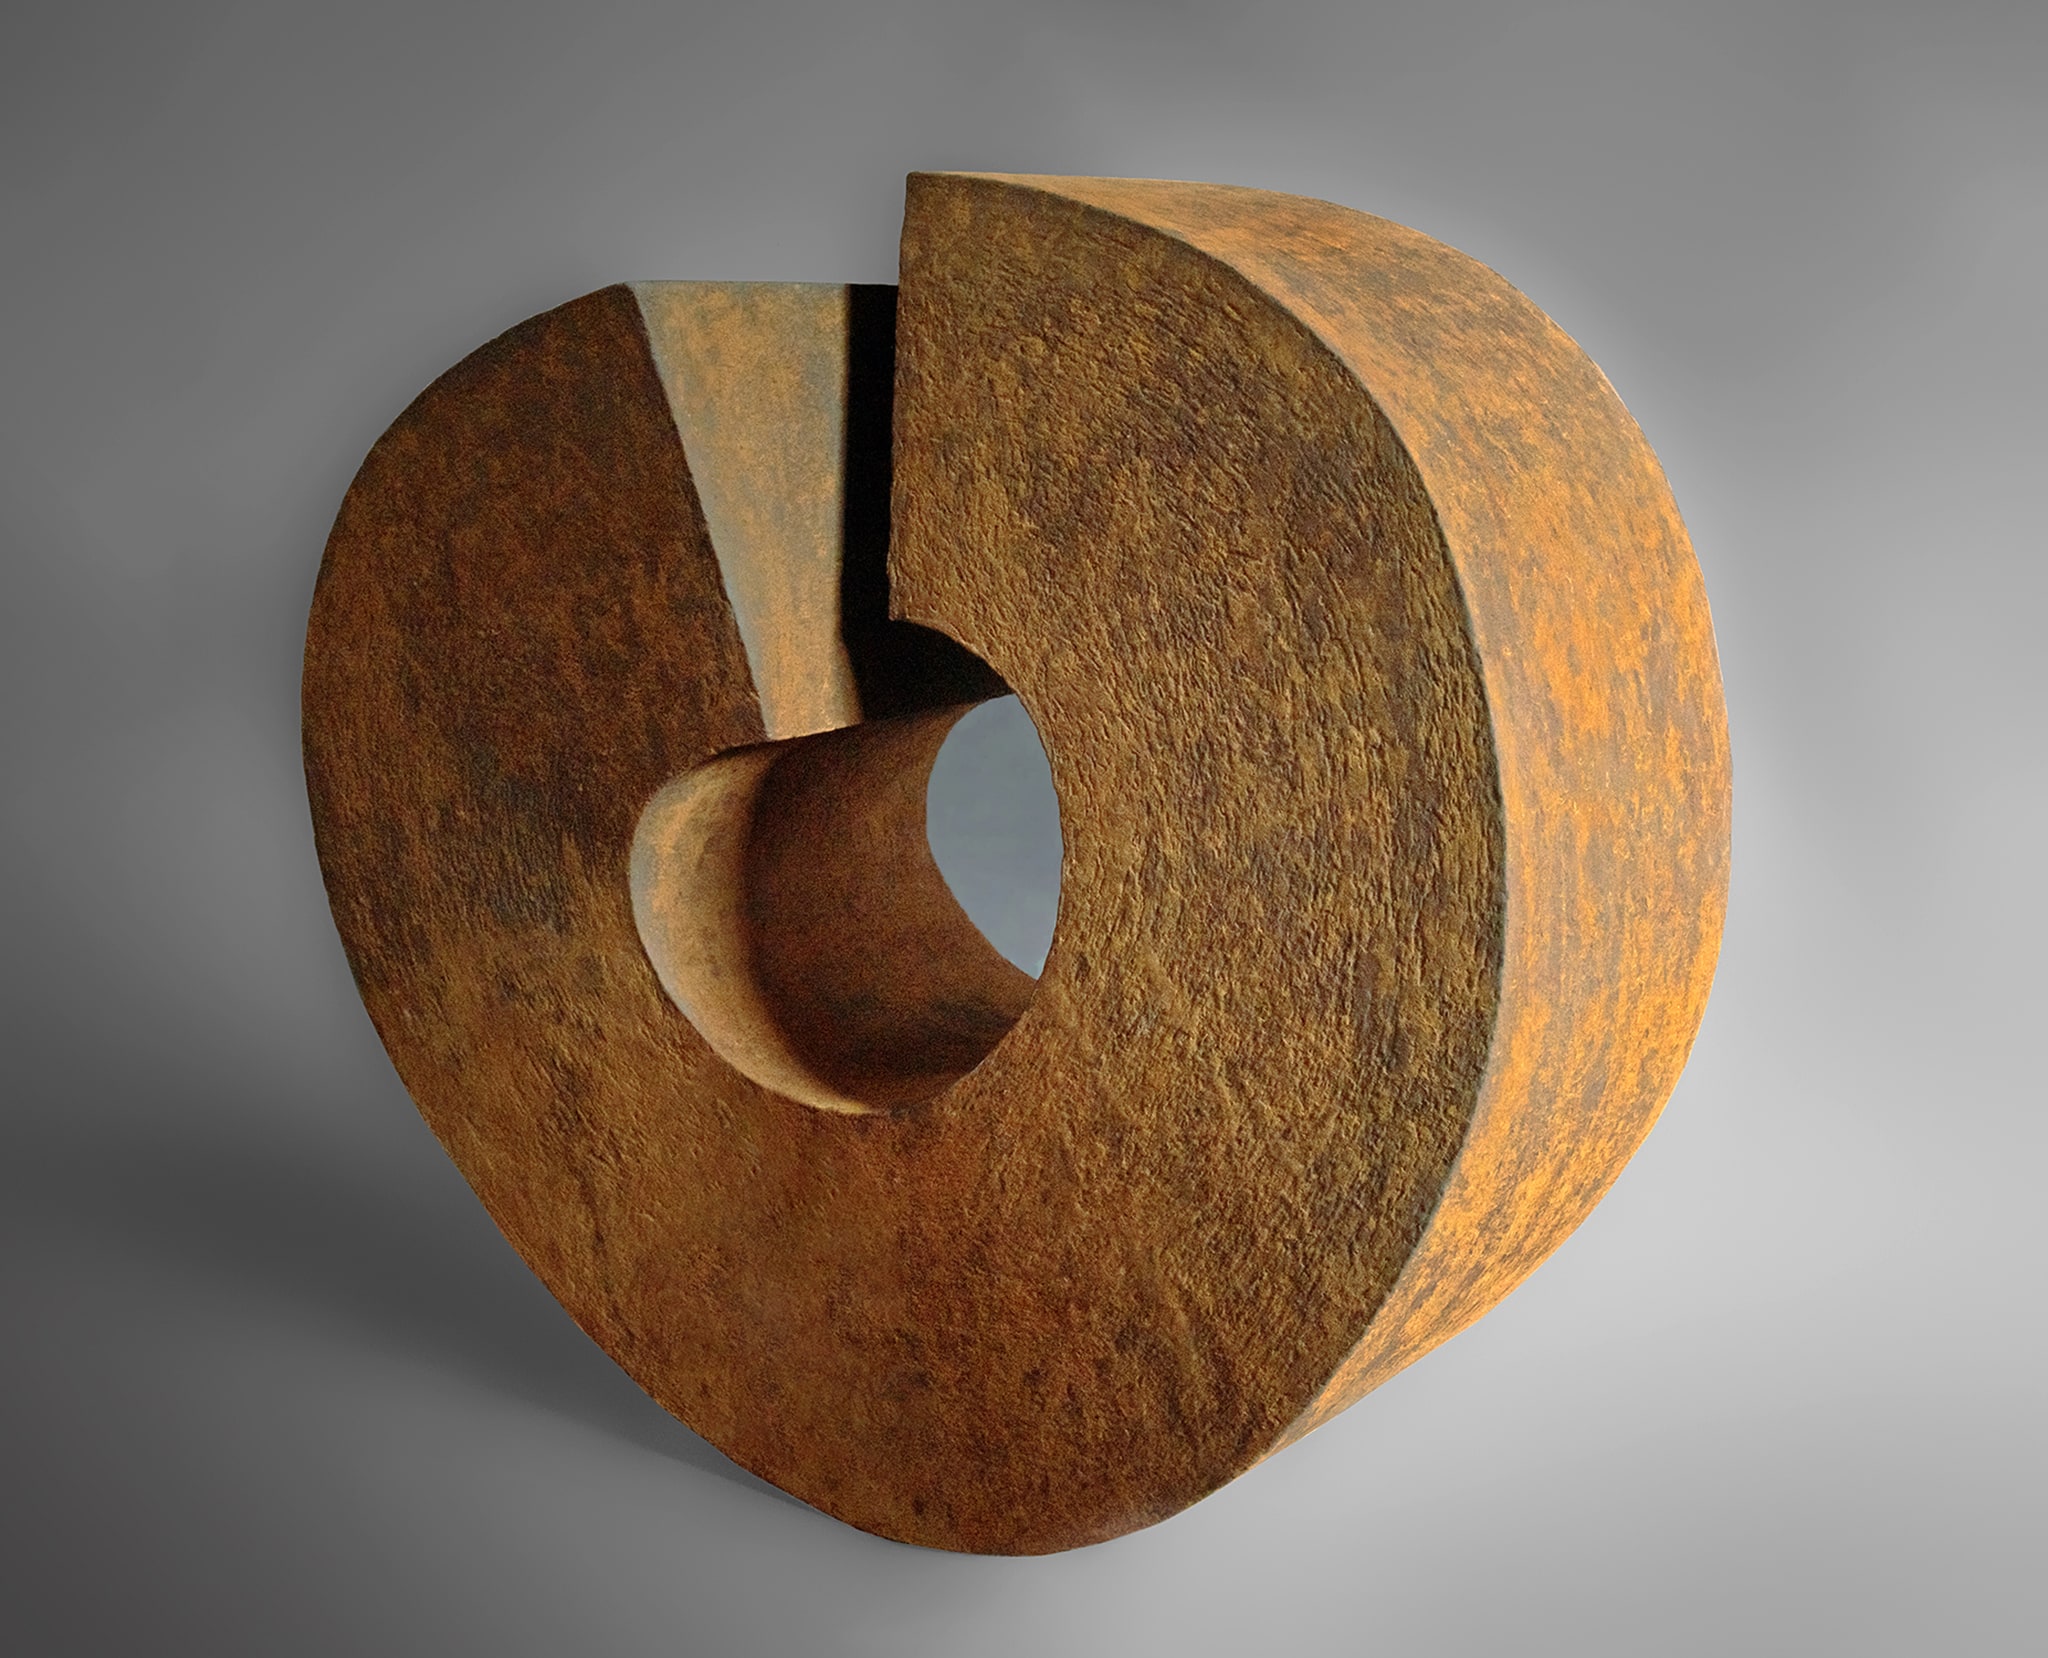 Crescent Lock, 23" x 23" x 13", clay with iron oxide finish